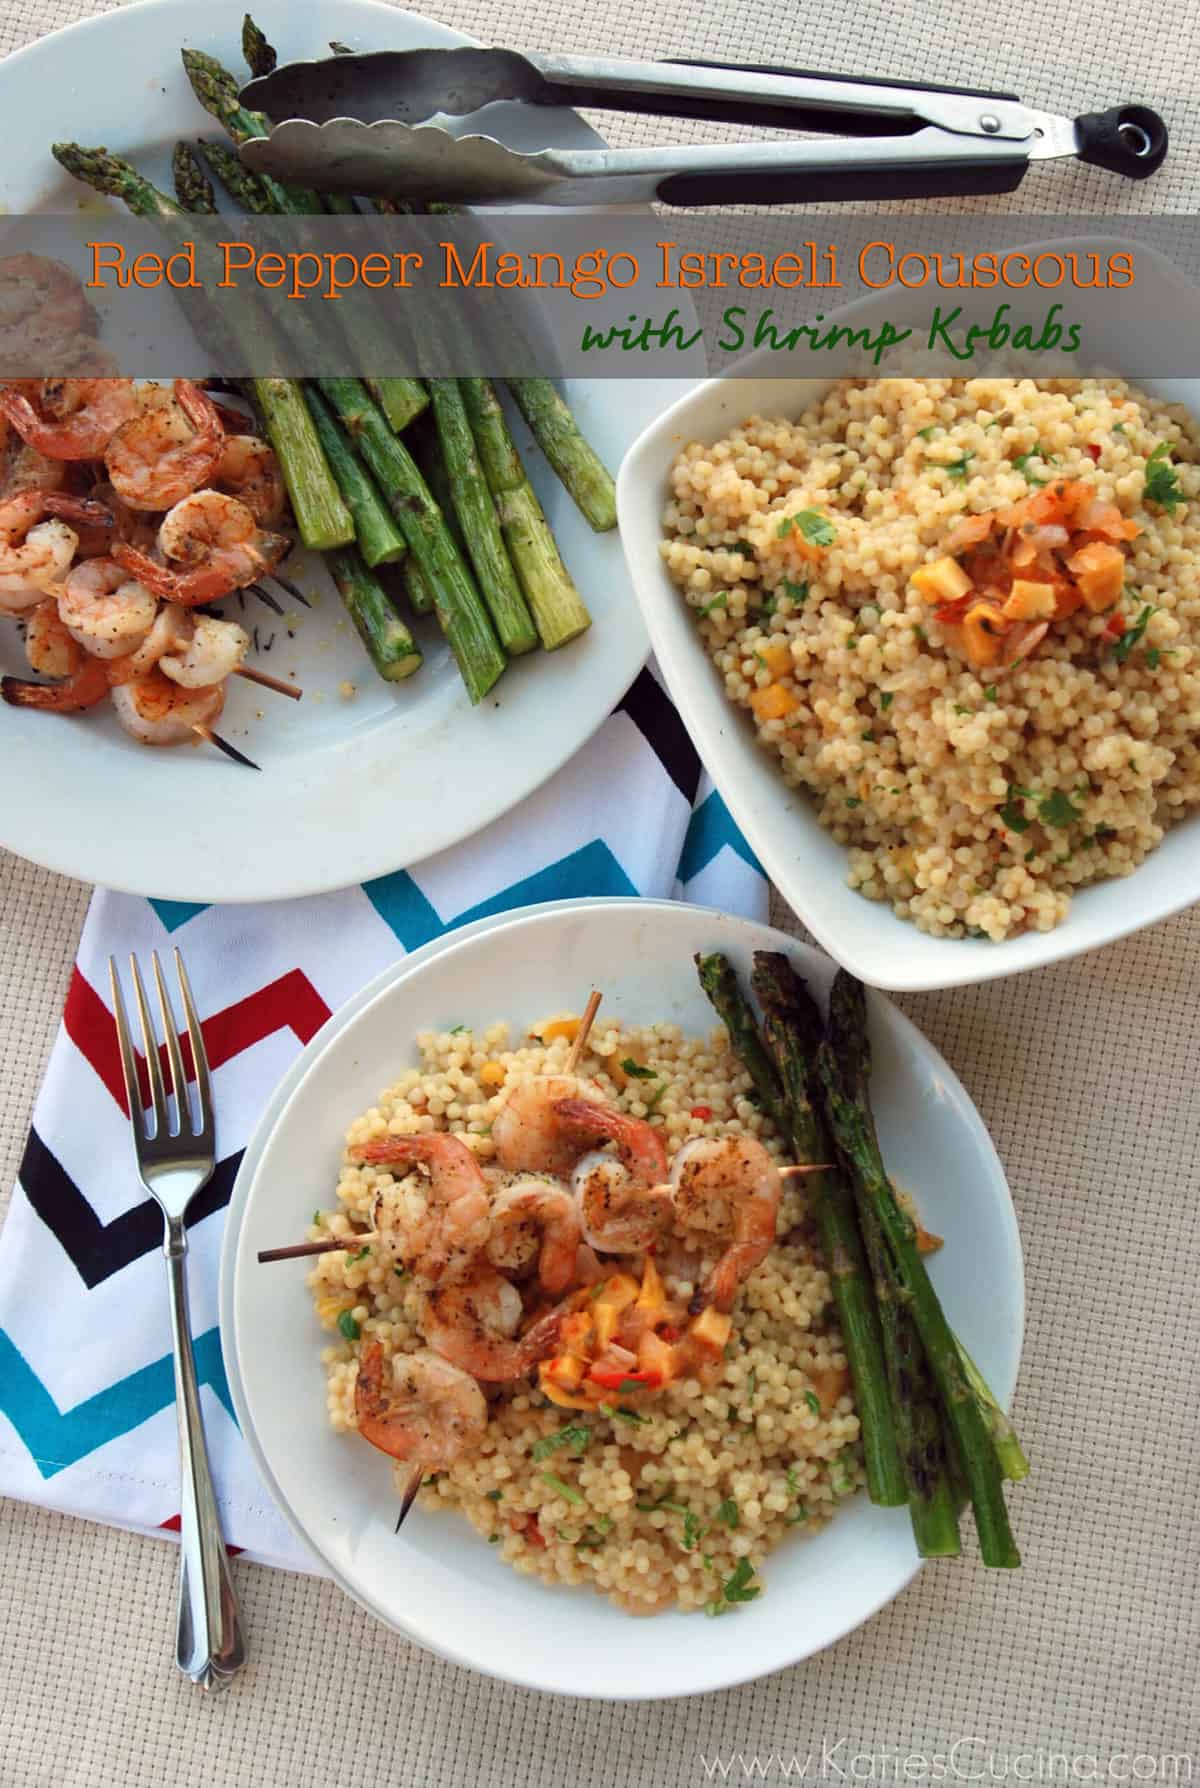 https://www.katiescucina.com/wp-content/uploads/2012/08/Red-Pepper-Mango-Israeli-Couscous-with-Shrimp-Kebabs-scaled.jpg